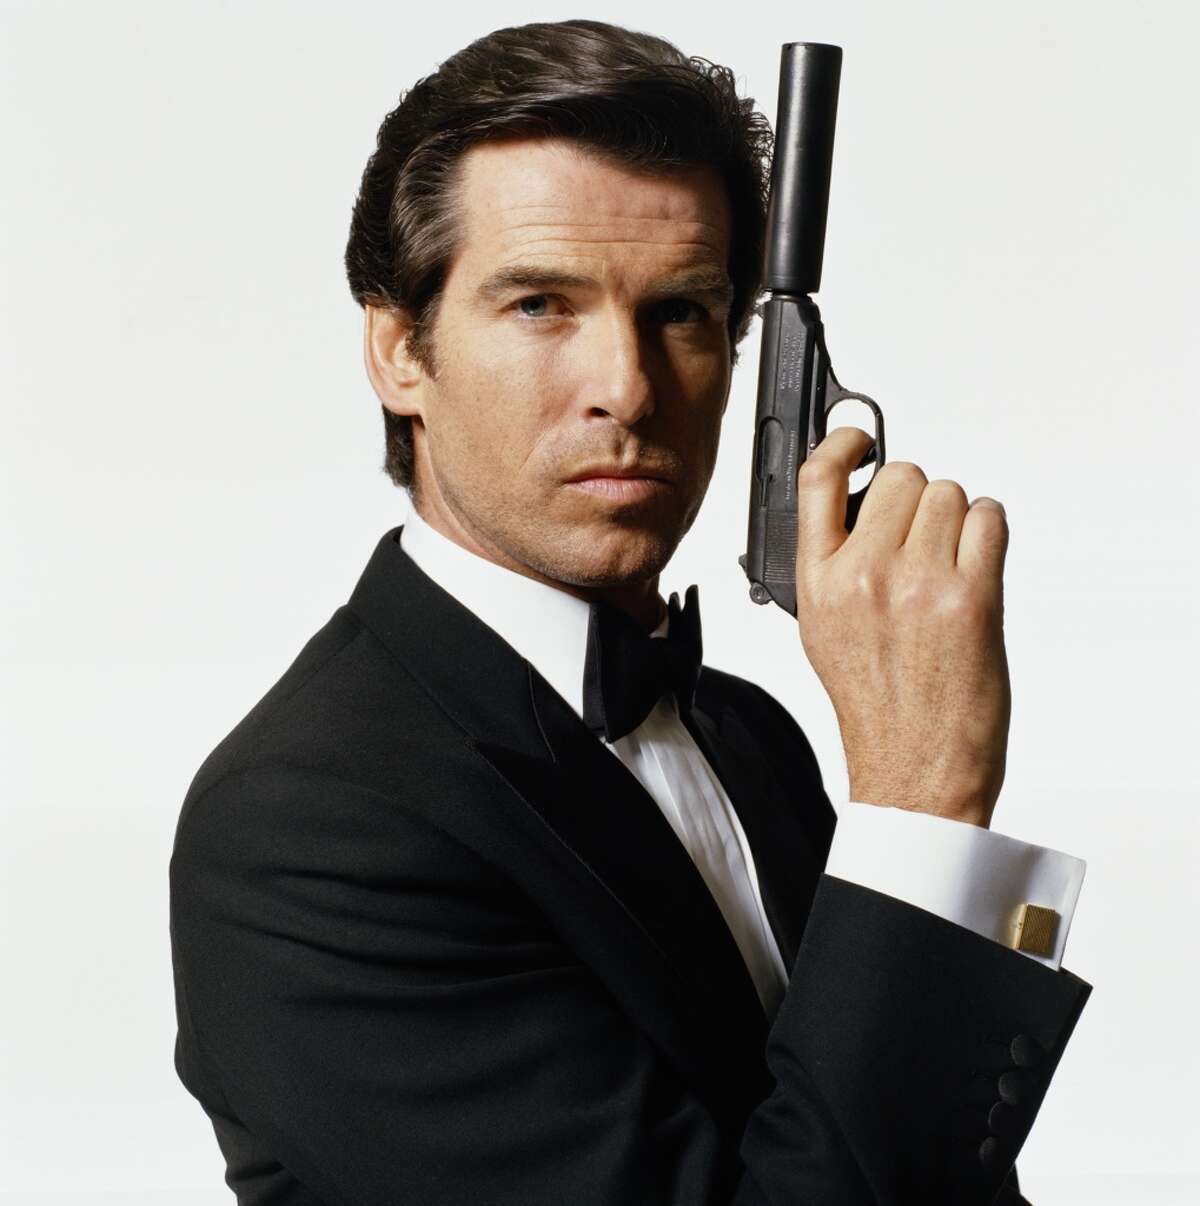 Irish actor Pierce Brosnan took over the James Bond role in the late 1990s....